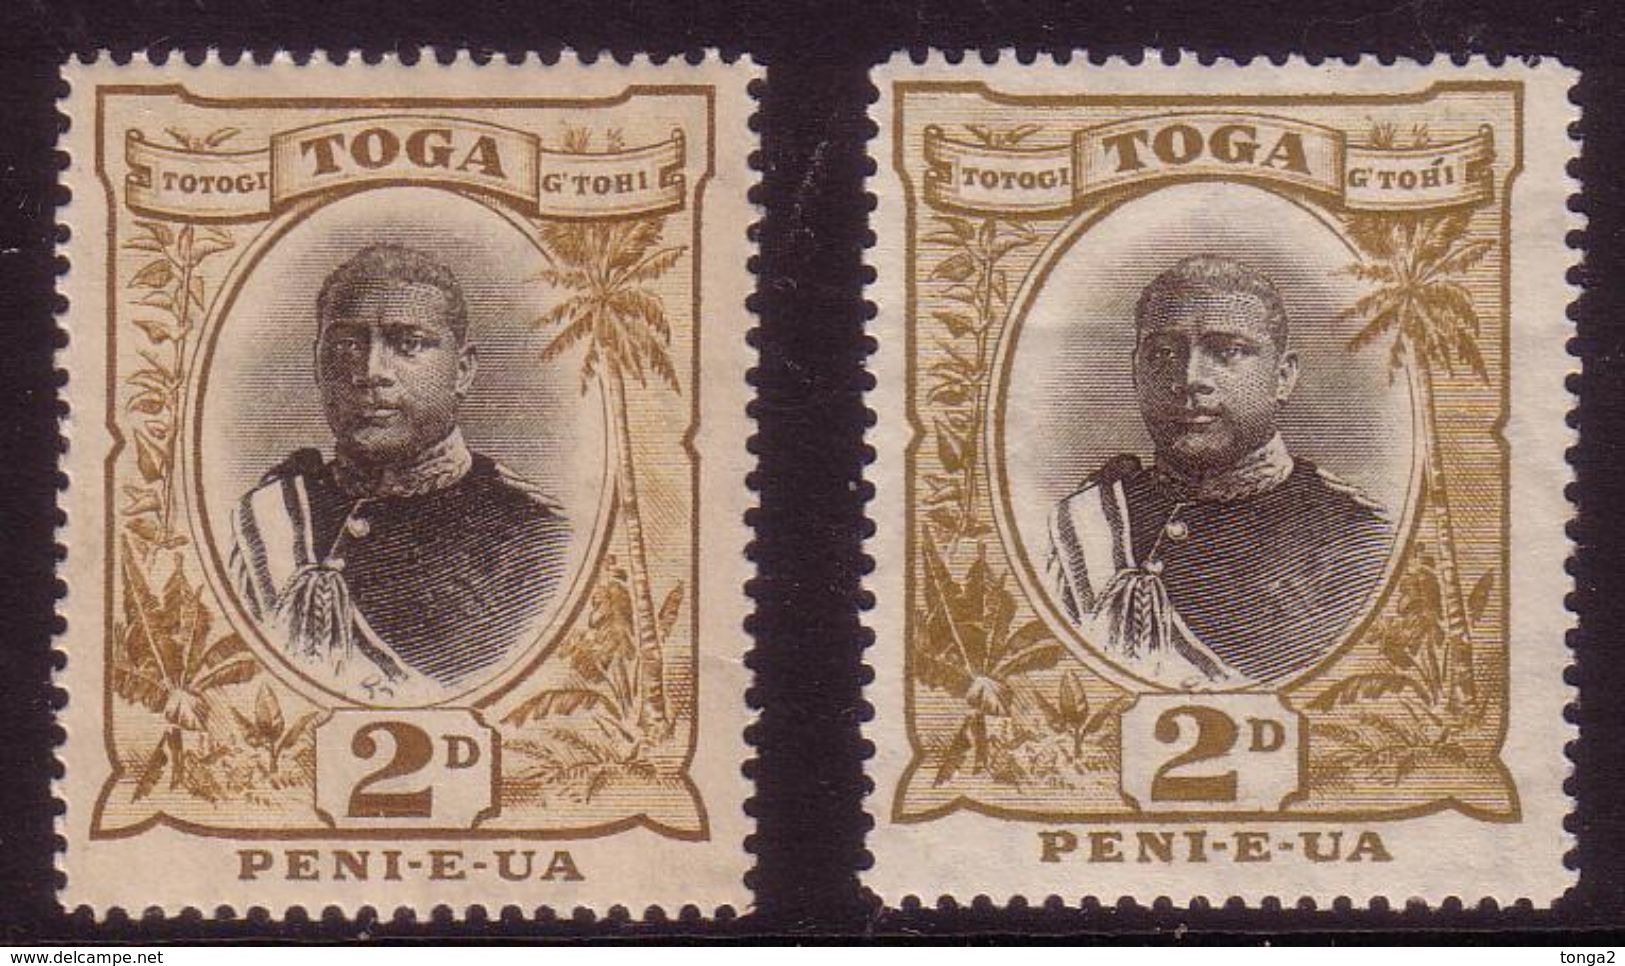 Early Tonga 1897 SG 40 + SG 40a - 2d King George - 5th + 6th Printings With Hilt - Mint Cat £52.00 - Tonga (1970-...)